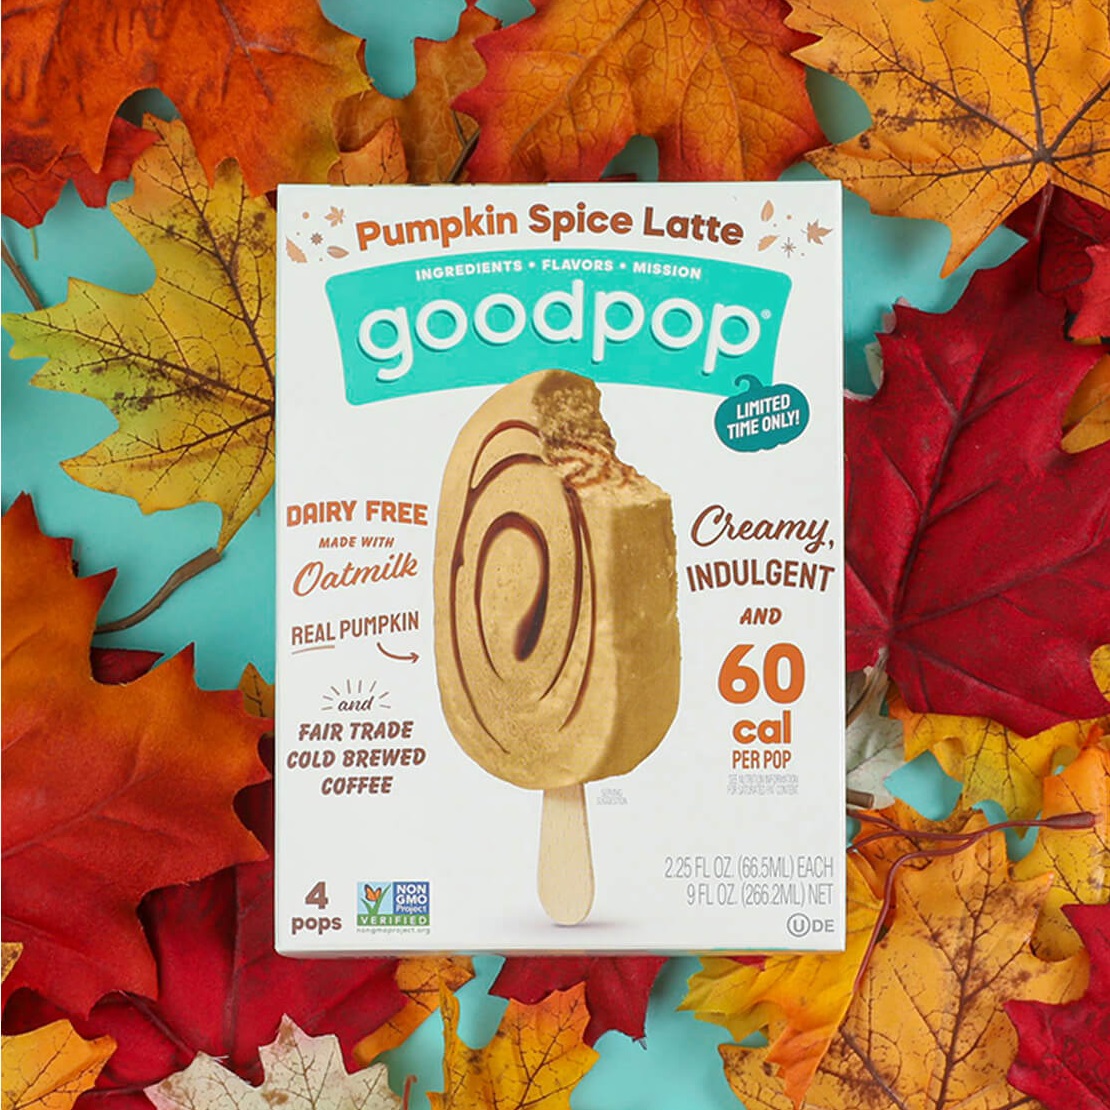 Dairy-Free Pumpkin Spice Guide with Vegan, Gluten-Free, and Allergy-friendly options